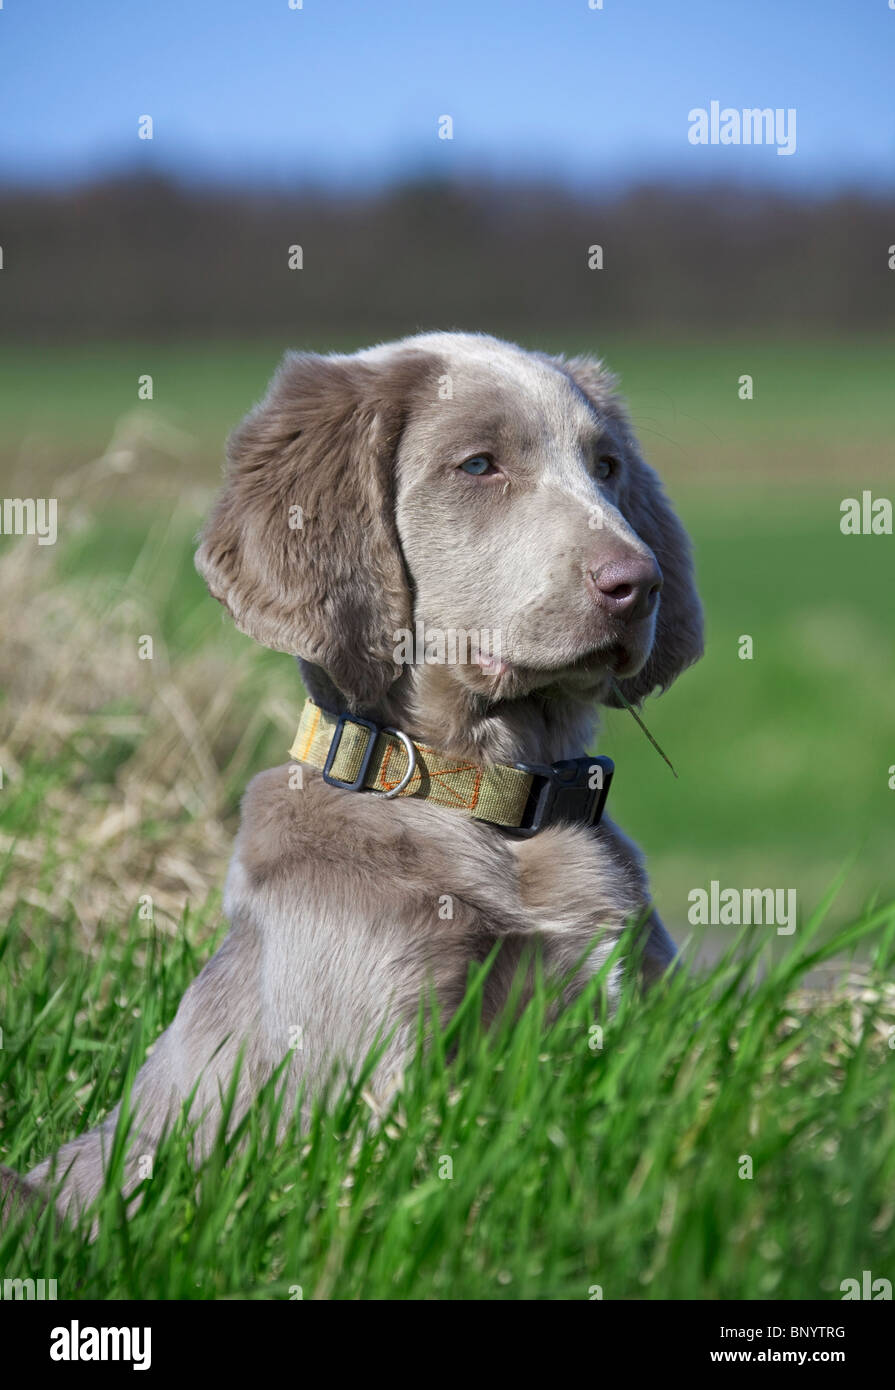 Weimaraner (Canis lupus familiaris) dog long-haired puppy in field, Germany Stock Photo